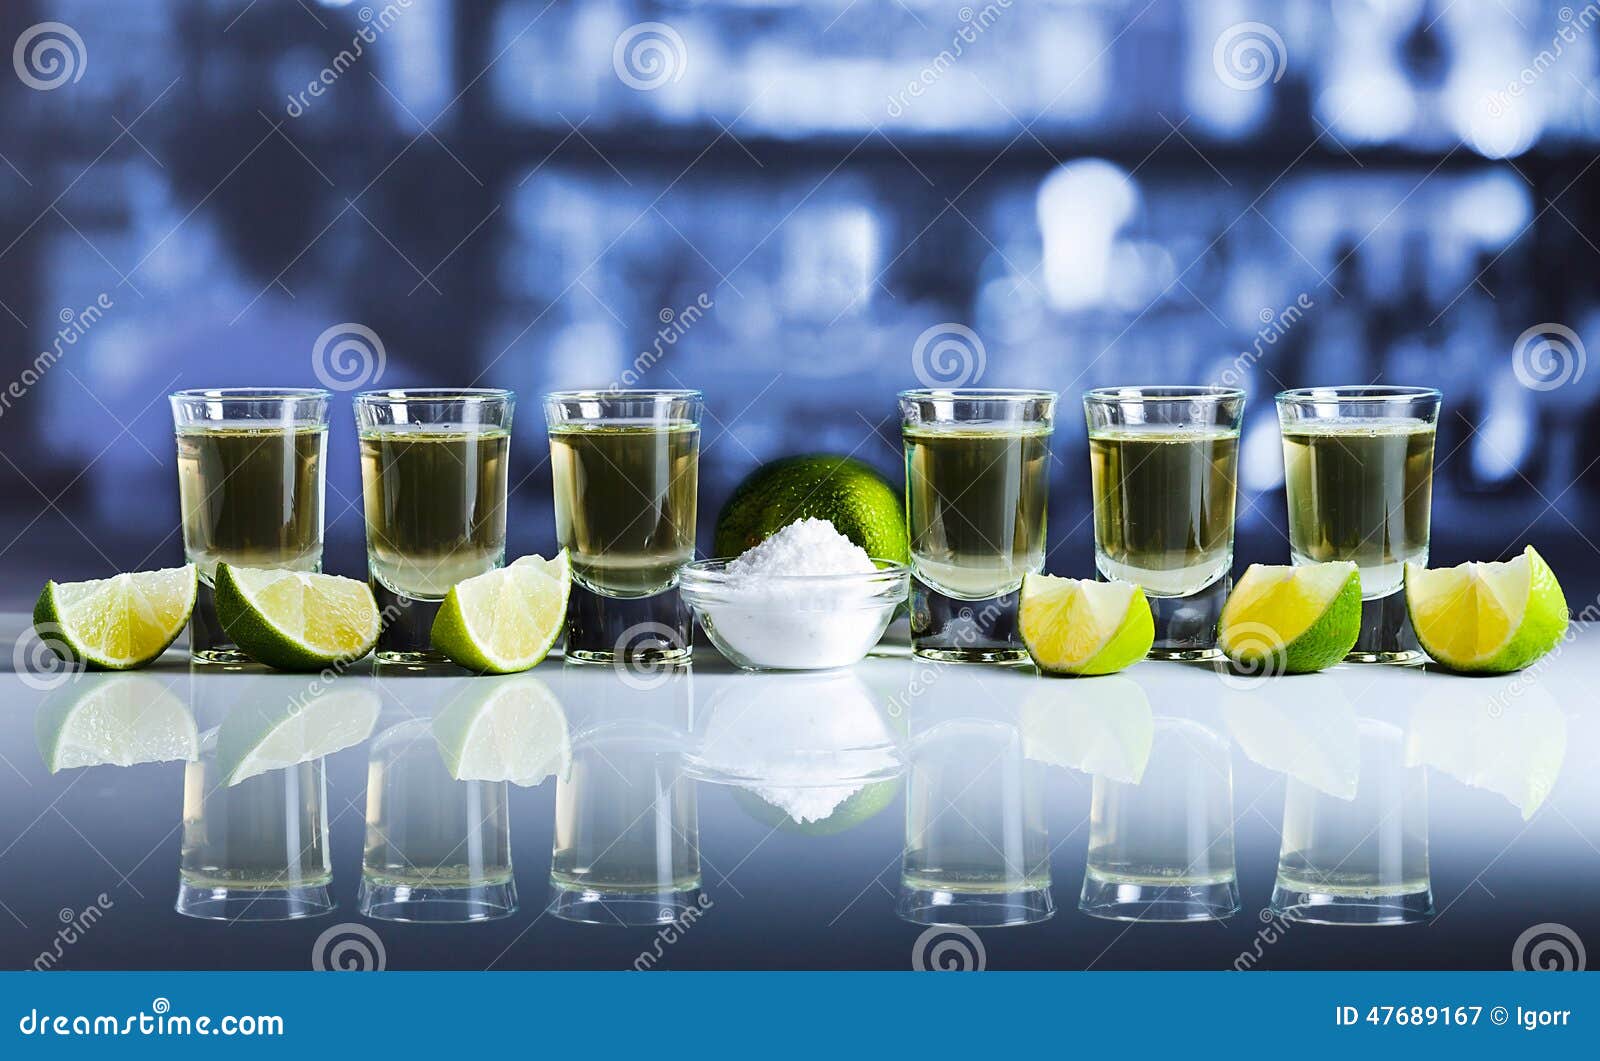 Tequila Lime And Salt On White Reflexive Table In Bar